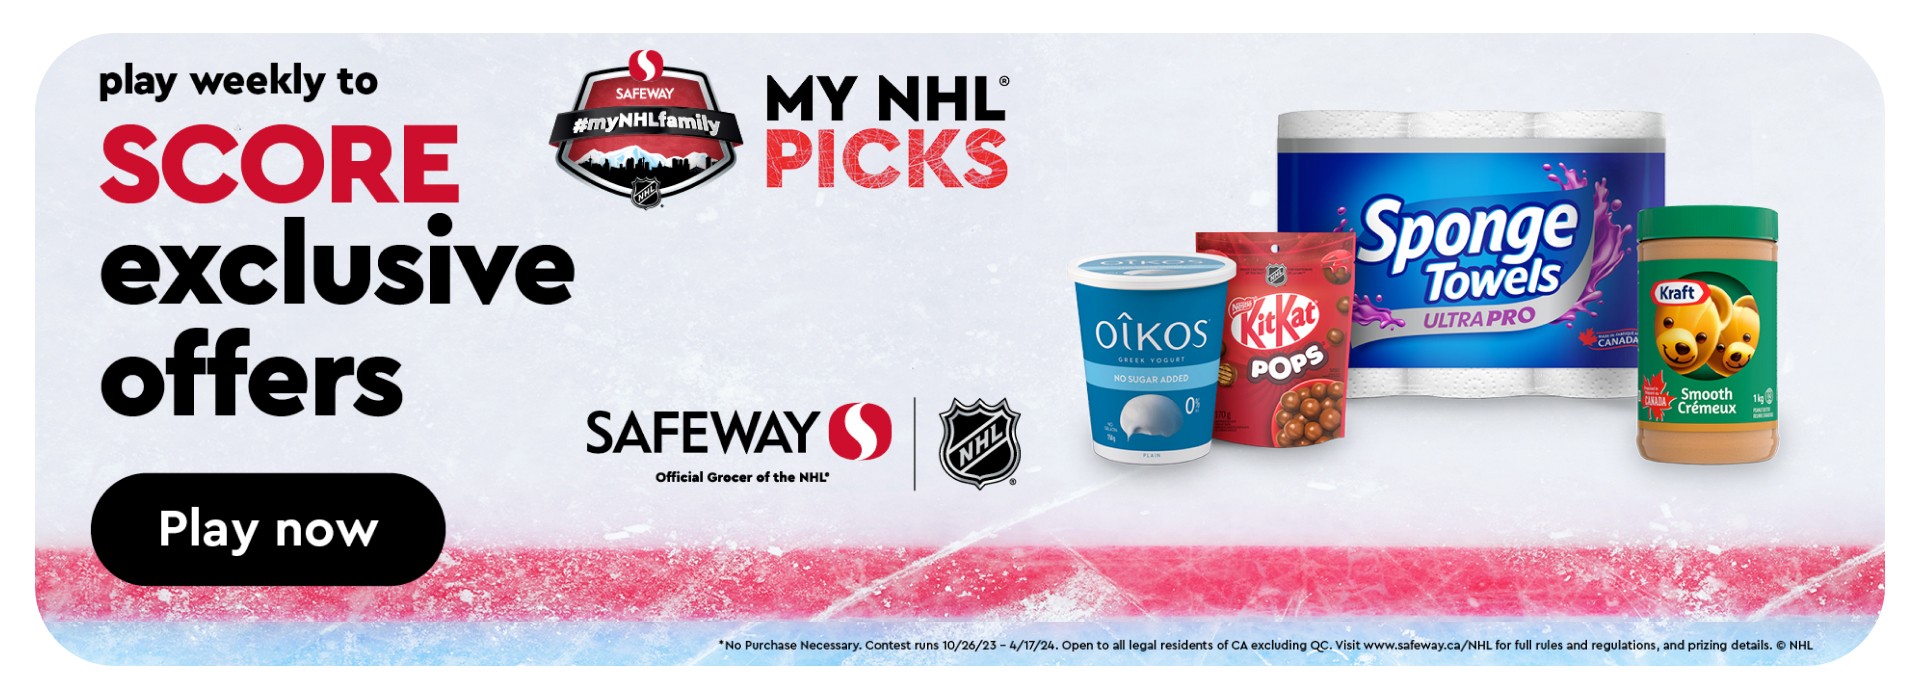 Text reading "Play weekly to score exclusive offers" along with the 'Play Now' button at the bottom and on the right side picture of some grocery products. The 'Safeway My NHL family - My NHL PICKS' logo is in the center.